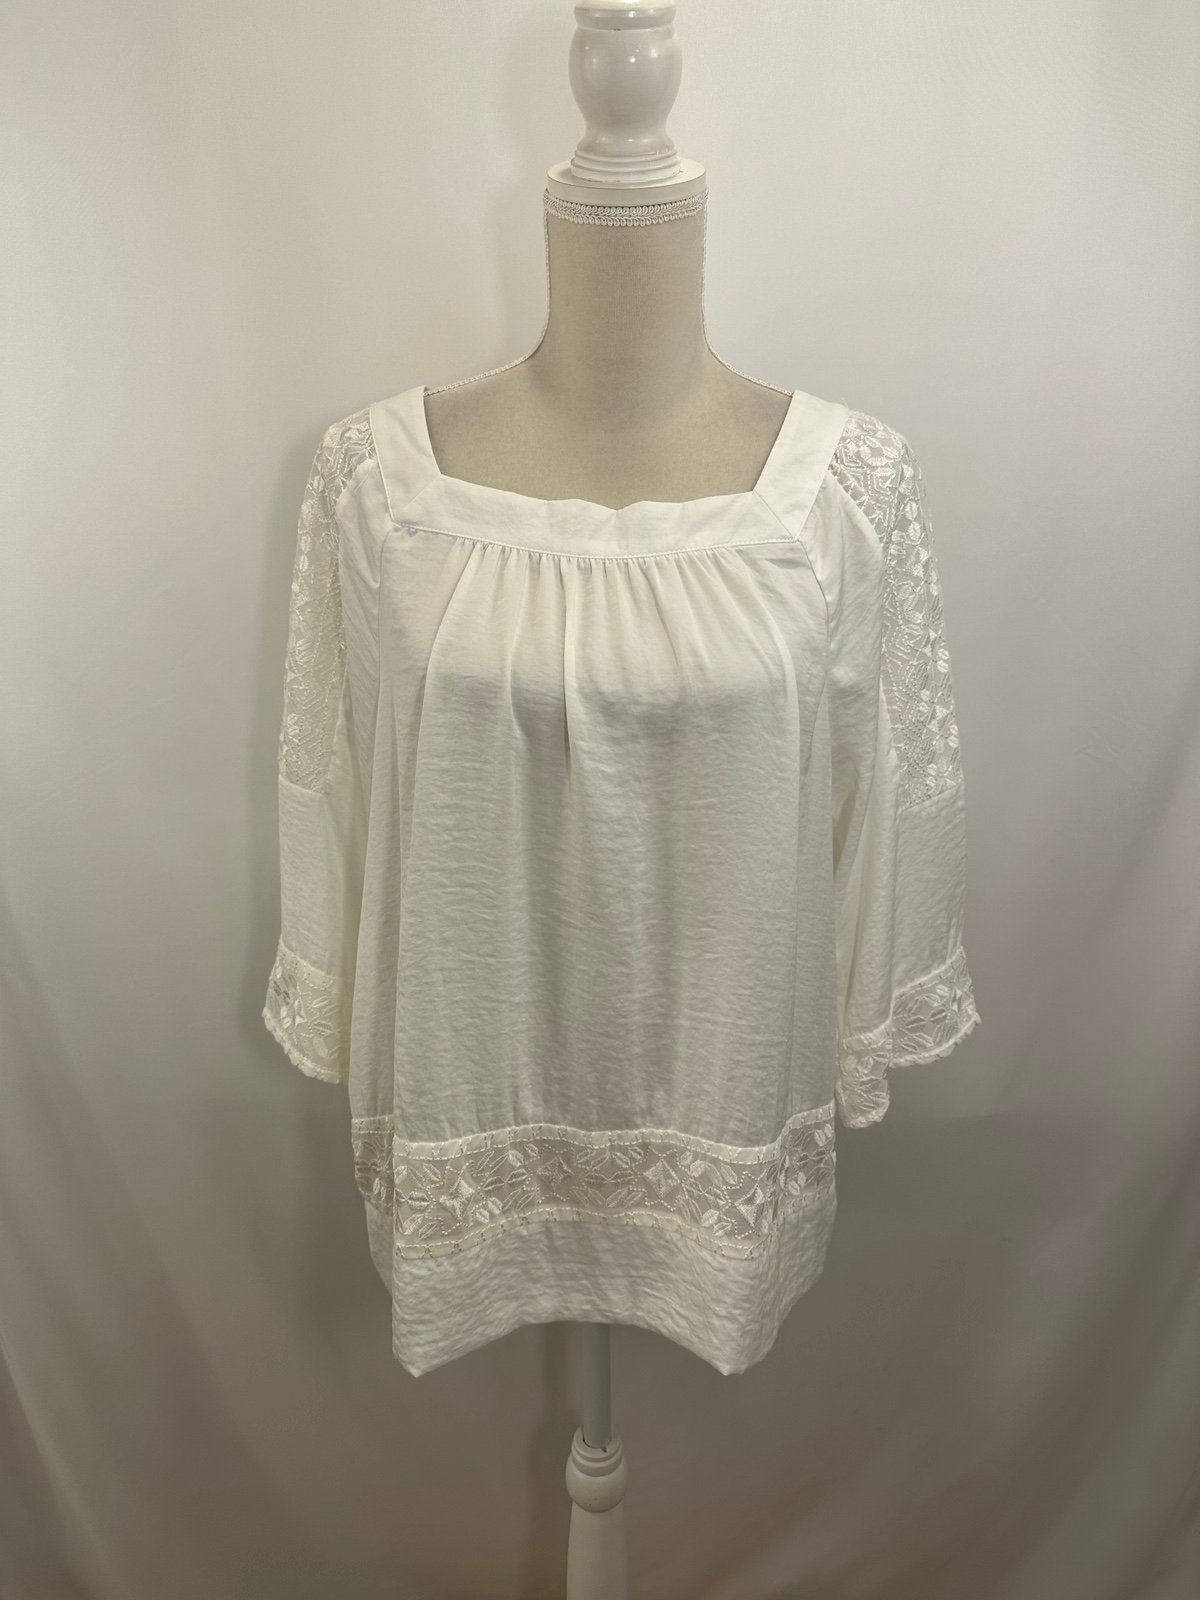 The Best Seller Adiva White Crushed Satin Lace Blouse S